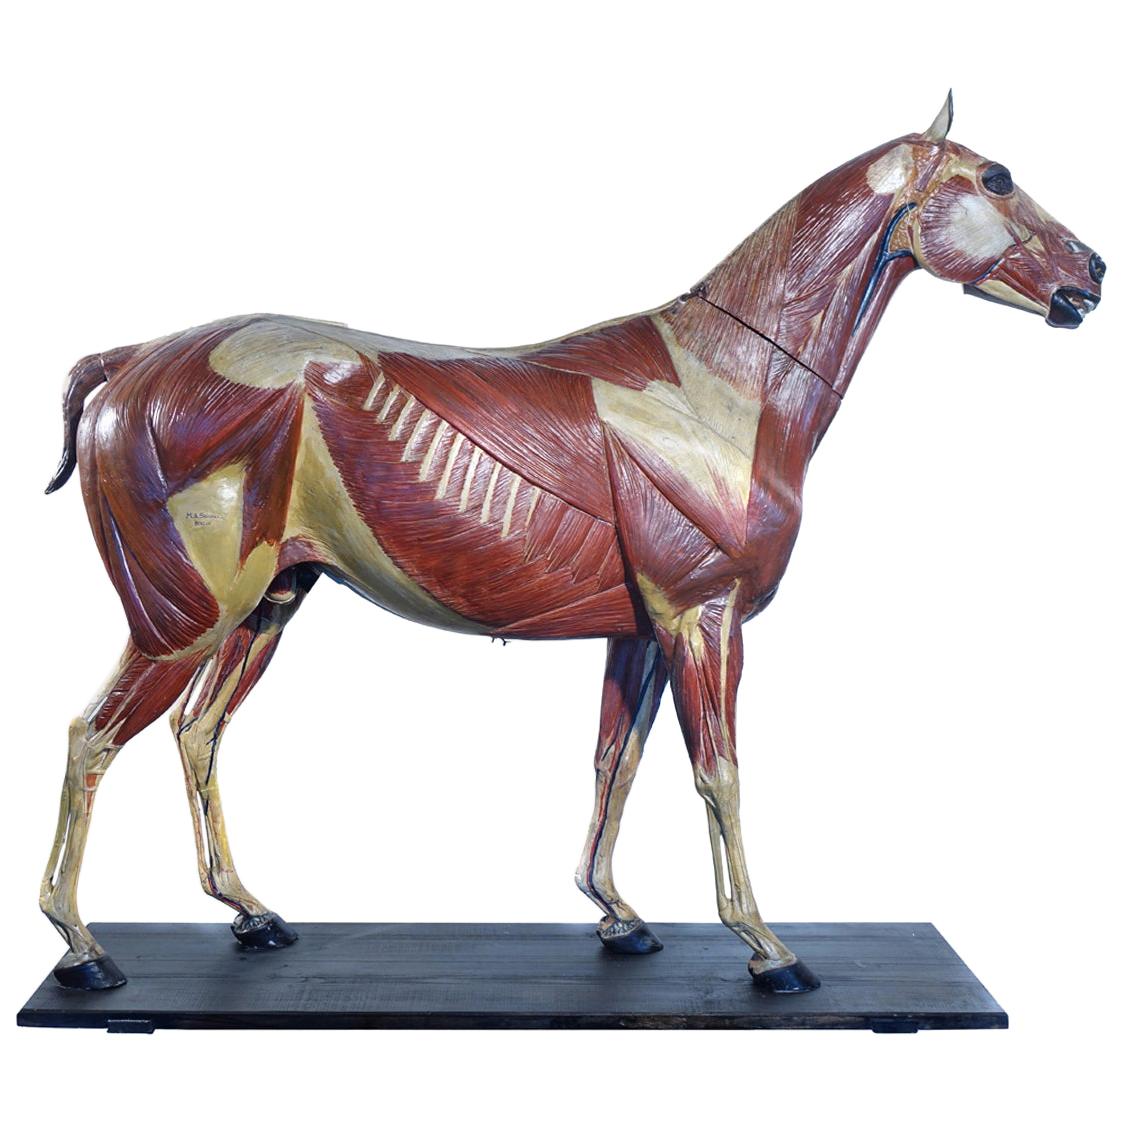 Rare German 1800s Anatomical Horse Model, Signed A.M.Sommer